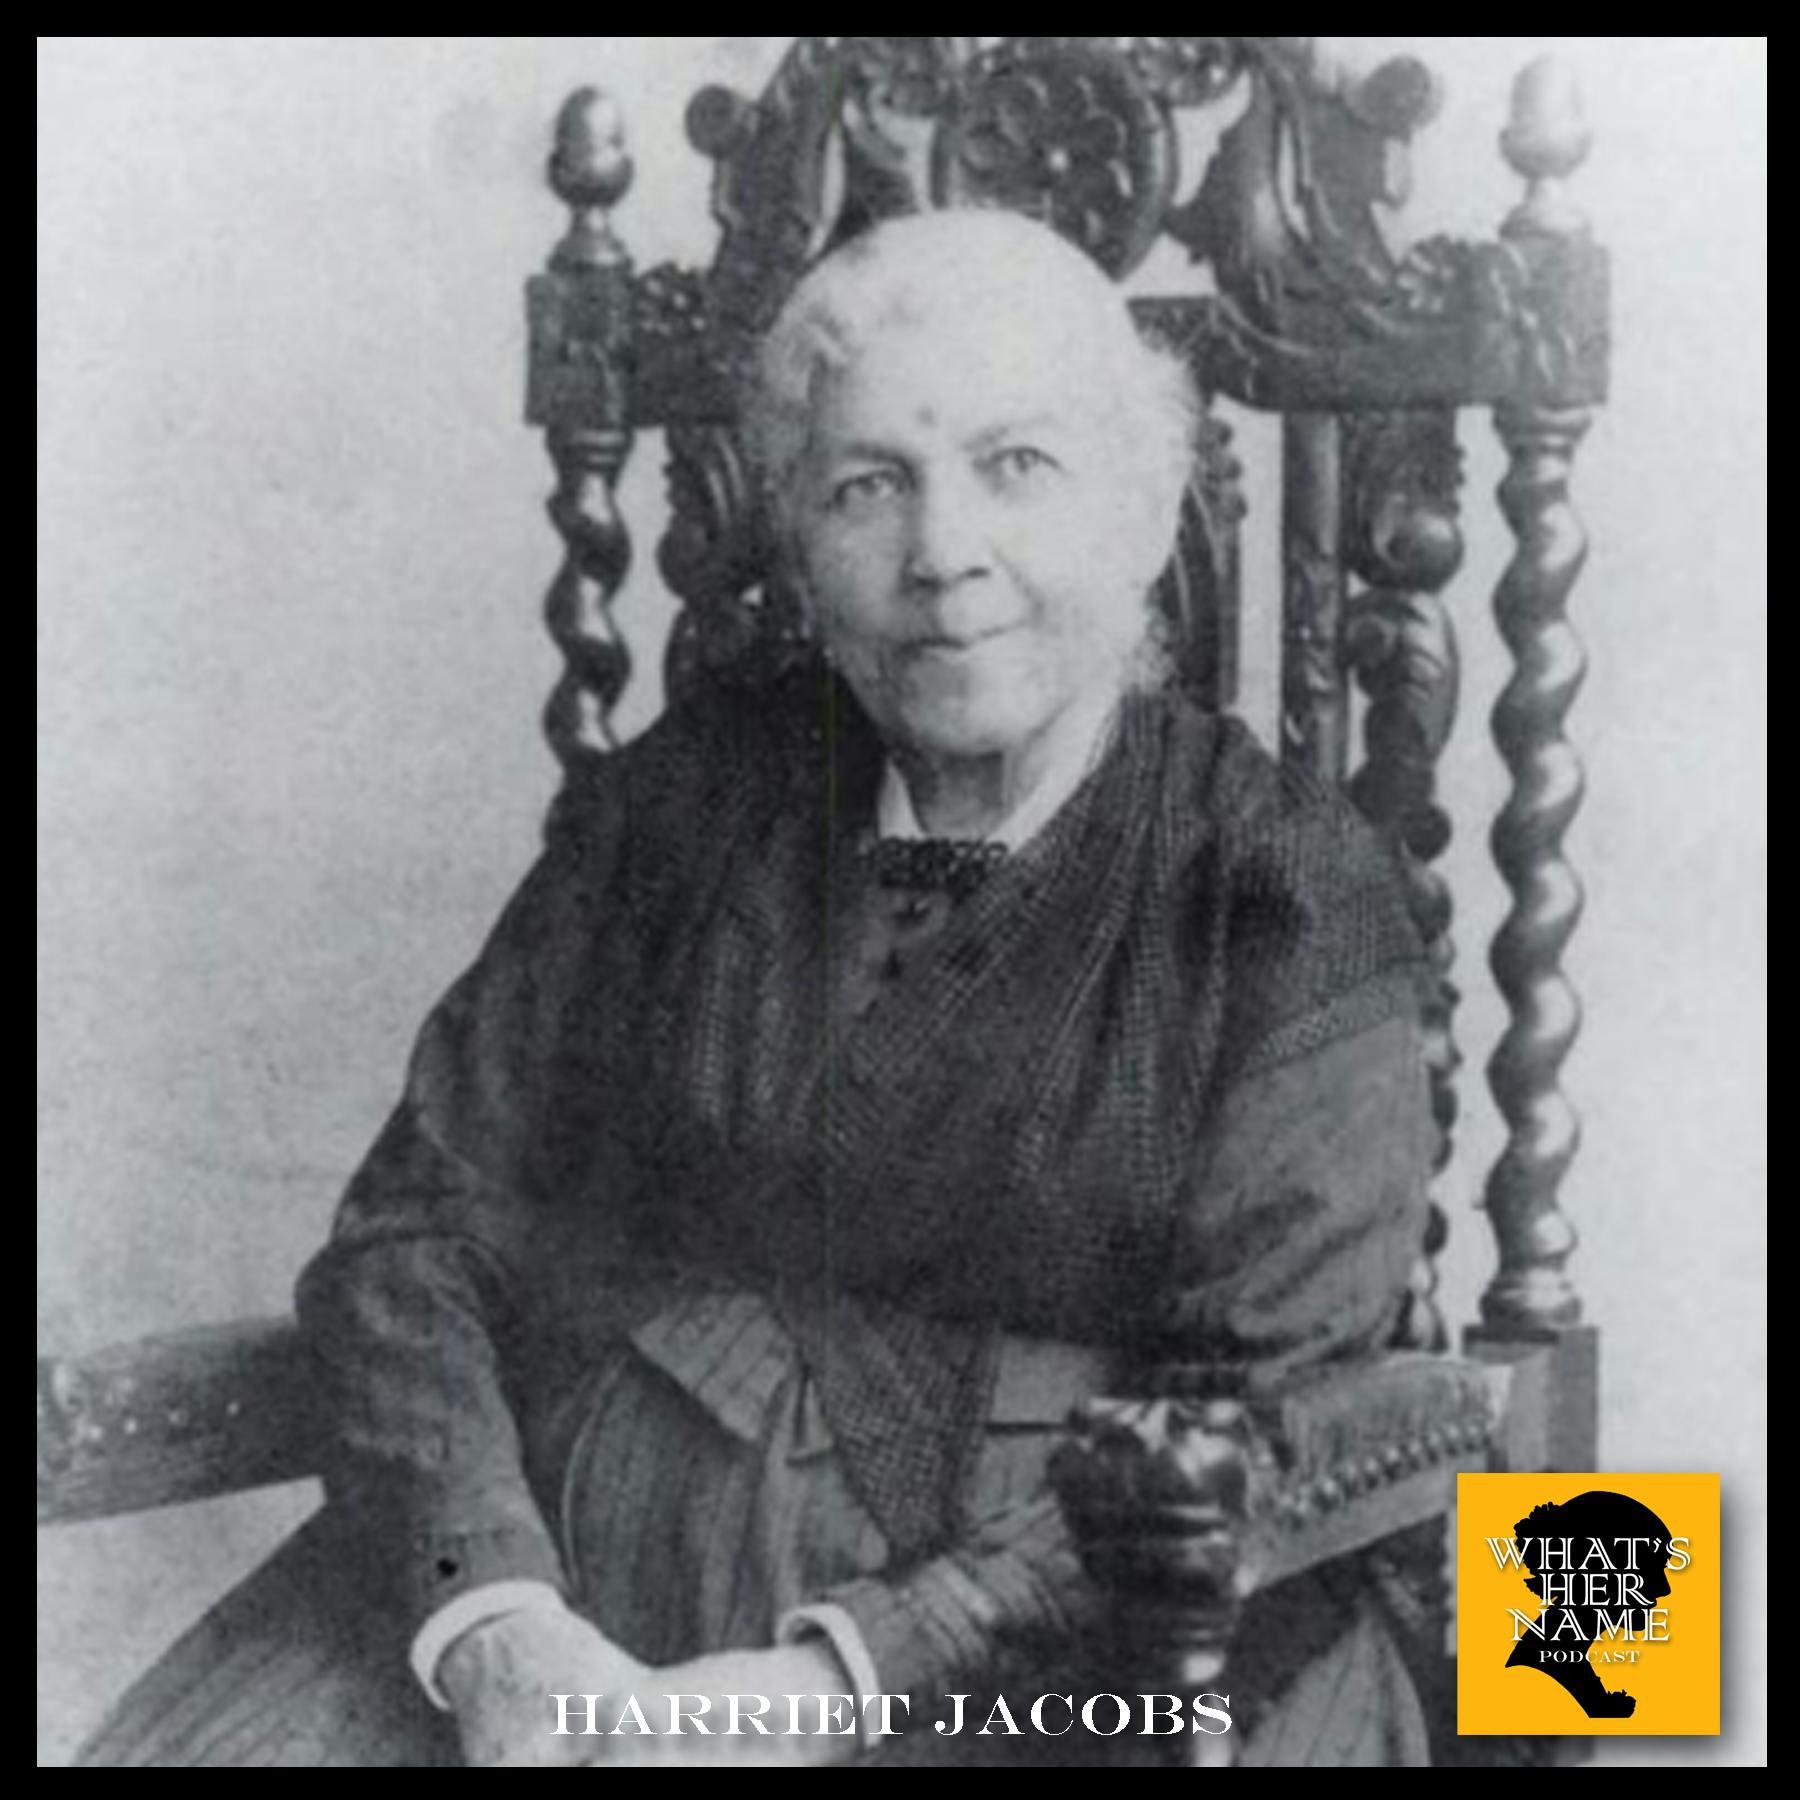 THE FREE WOMAN Harriet Jacobs